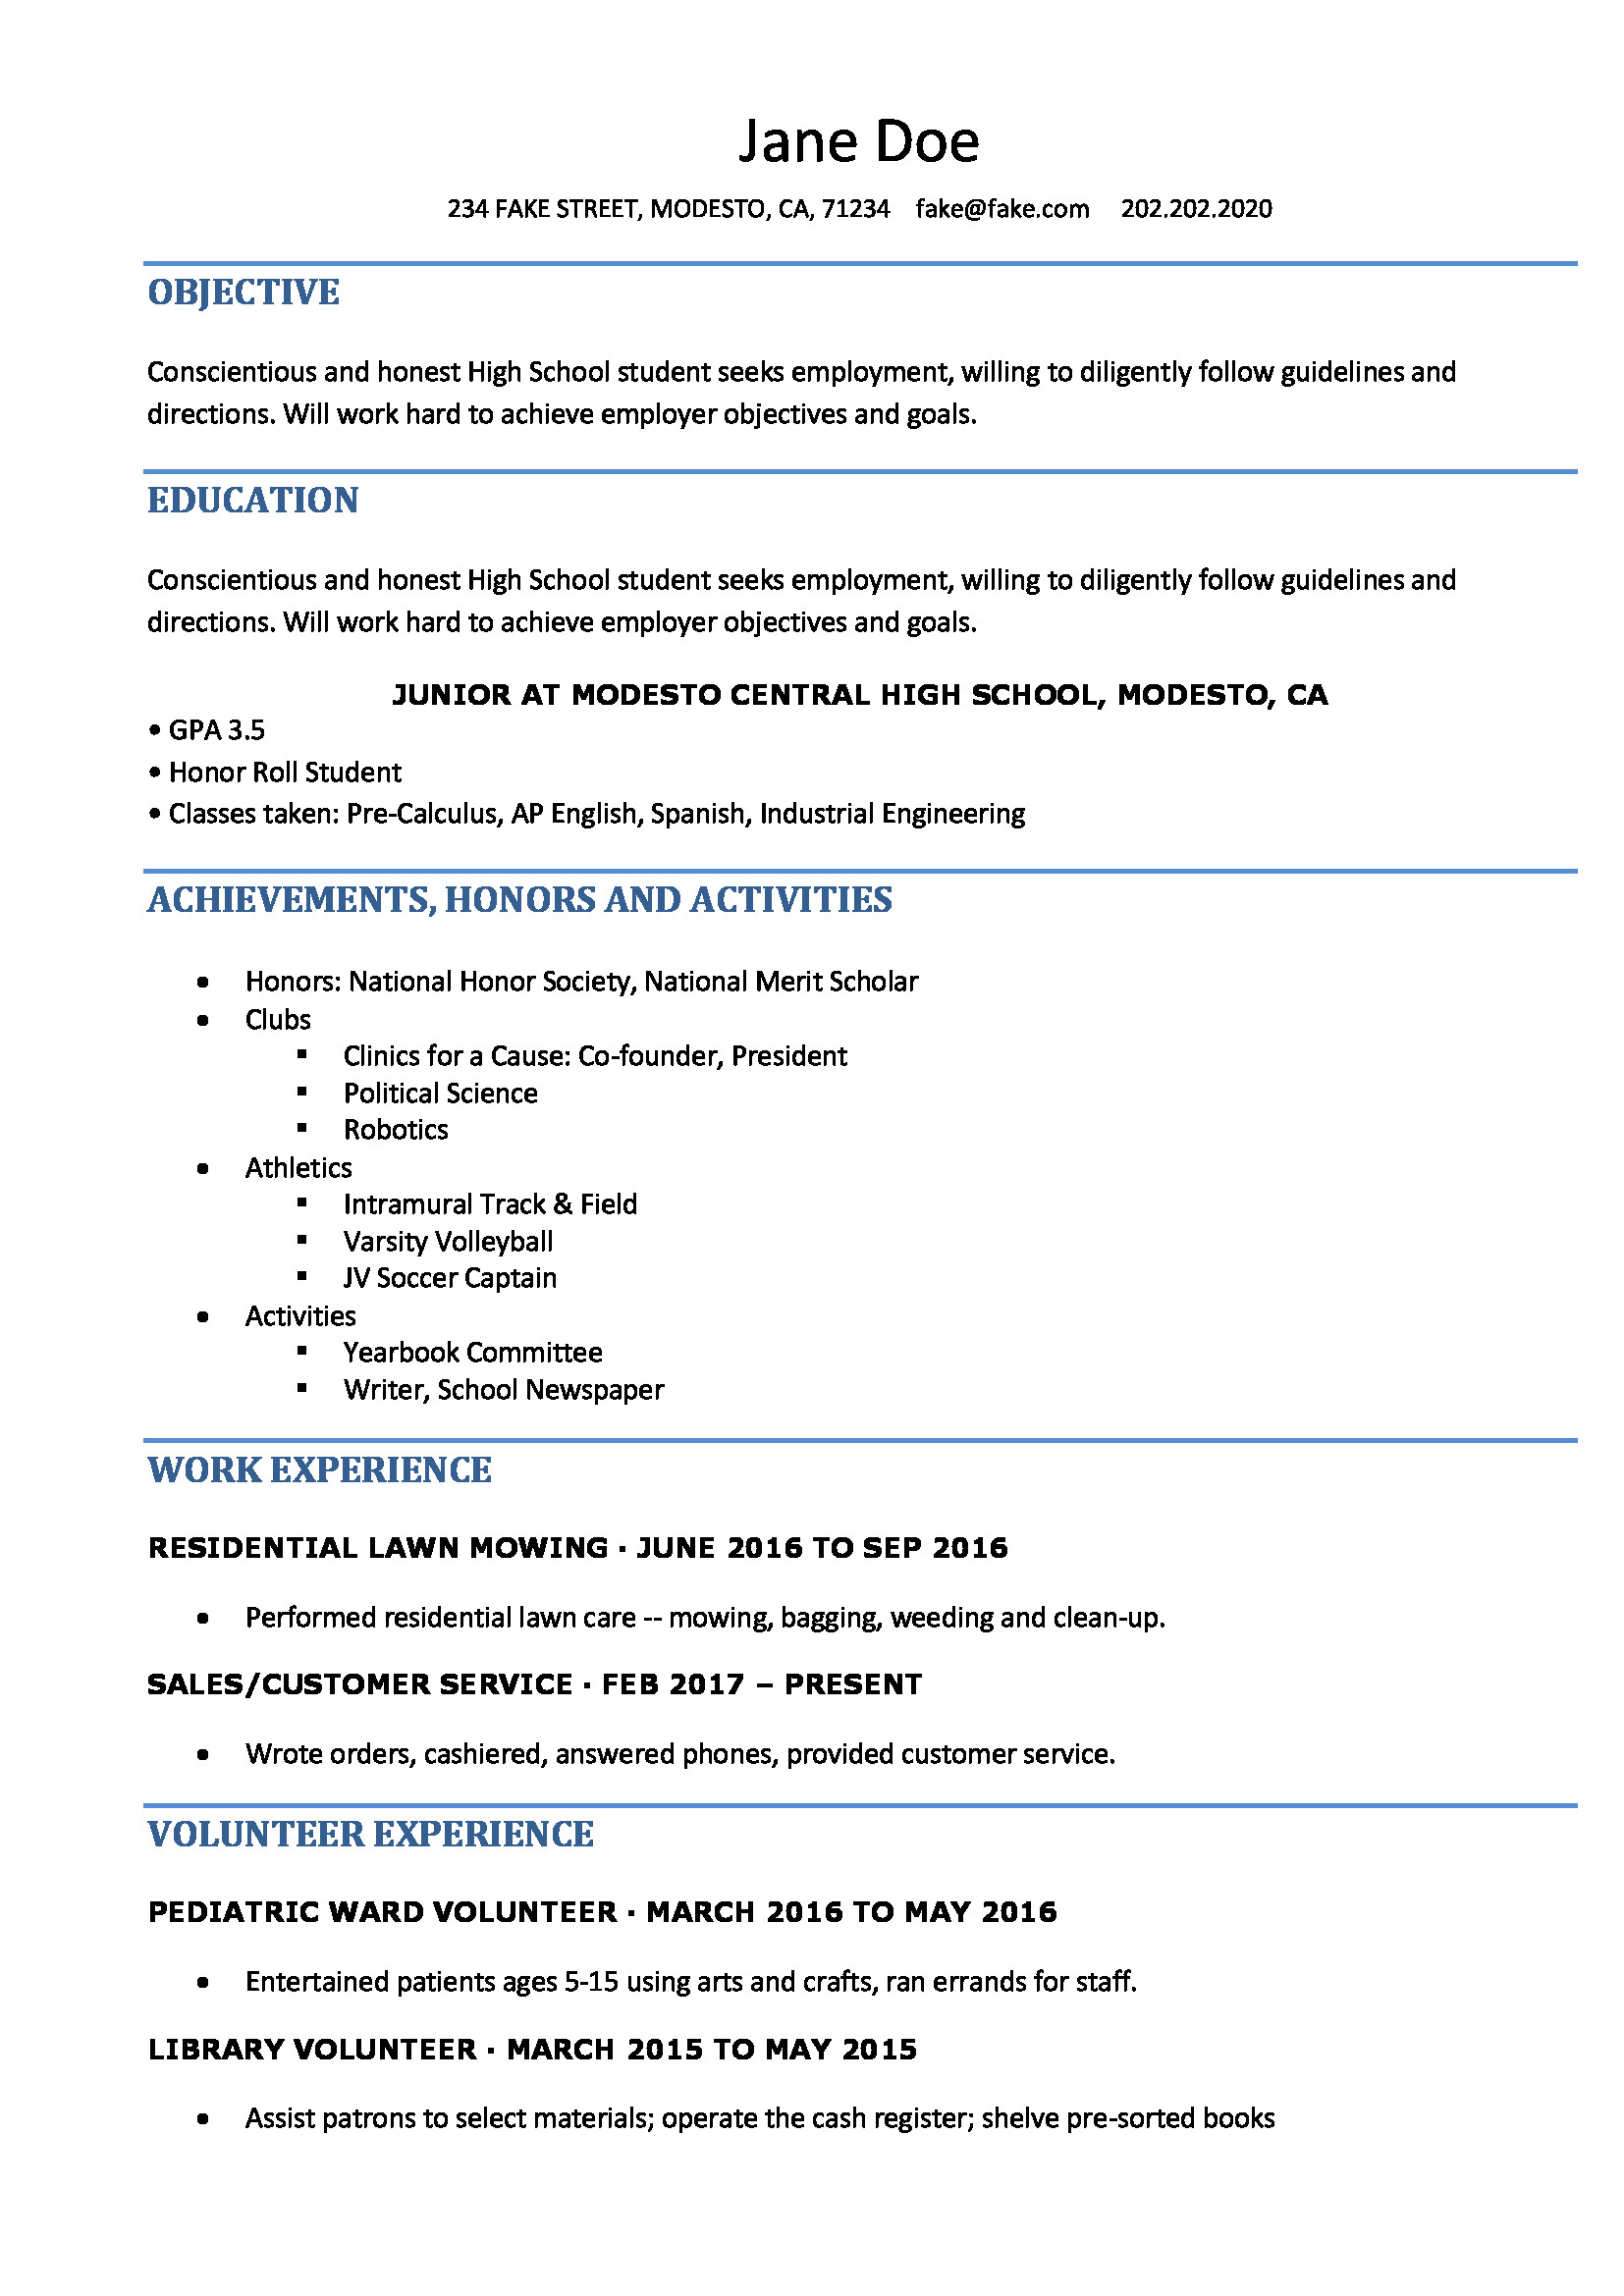 Sample Resume for A Student In High School High School Resume Resume Templates for High School